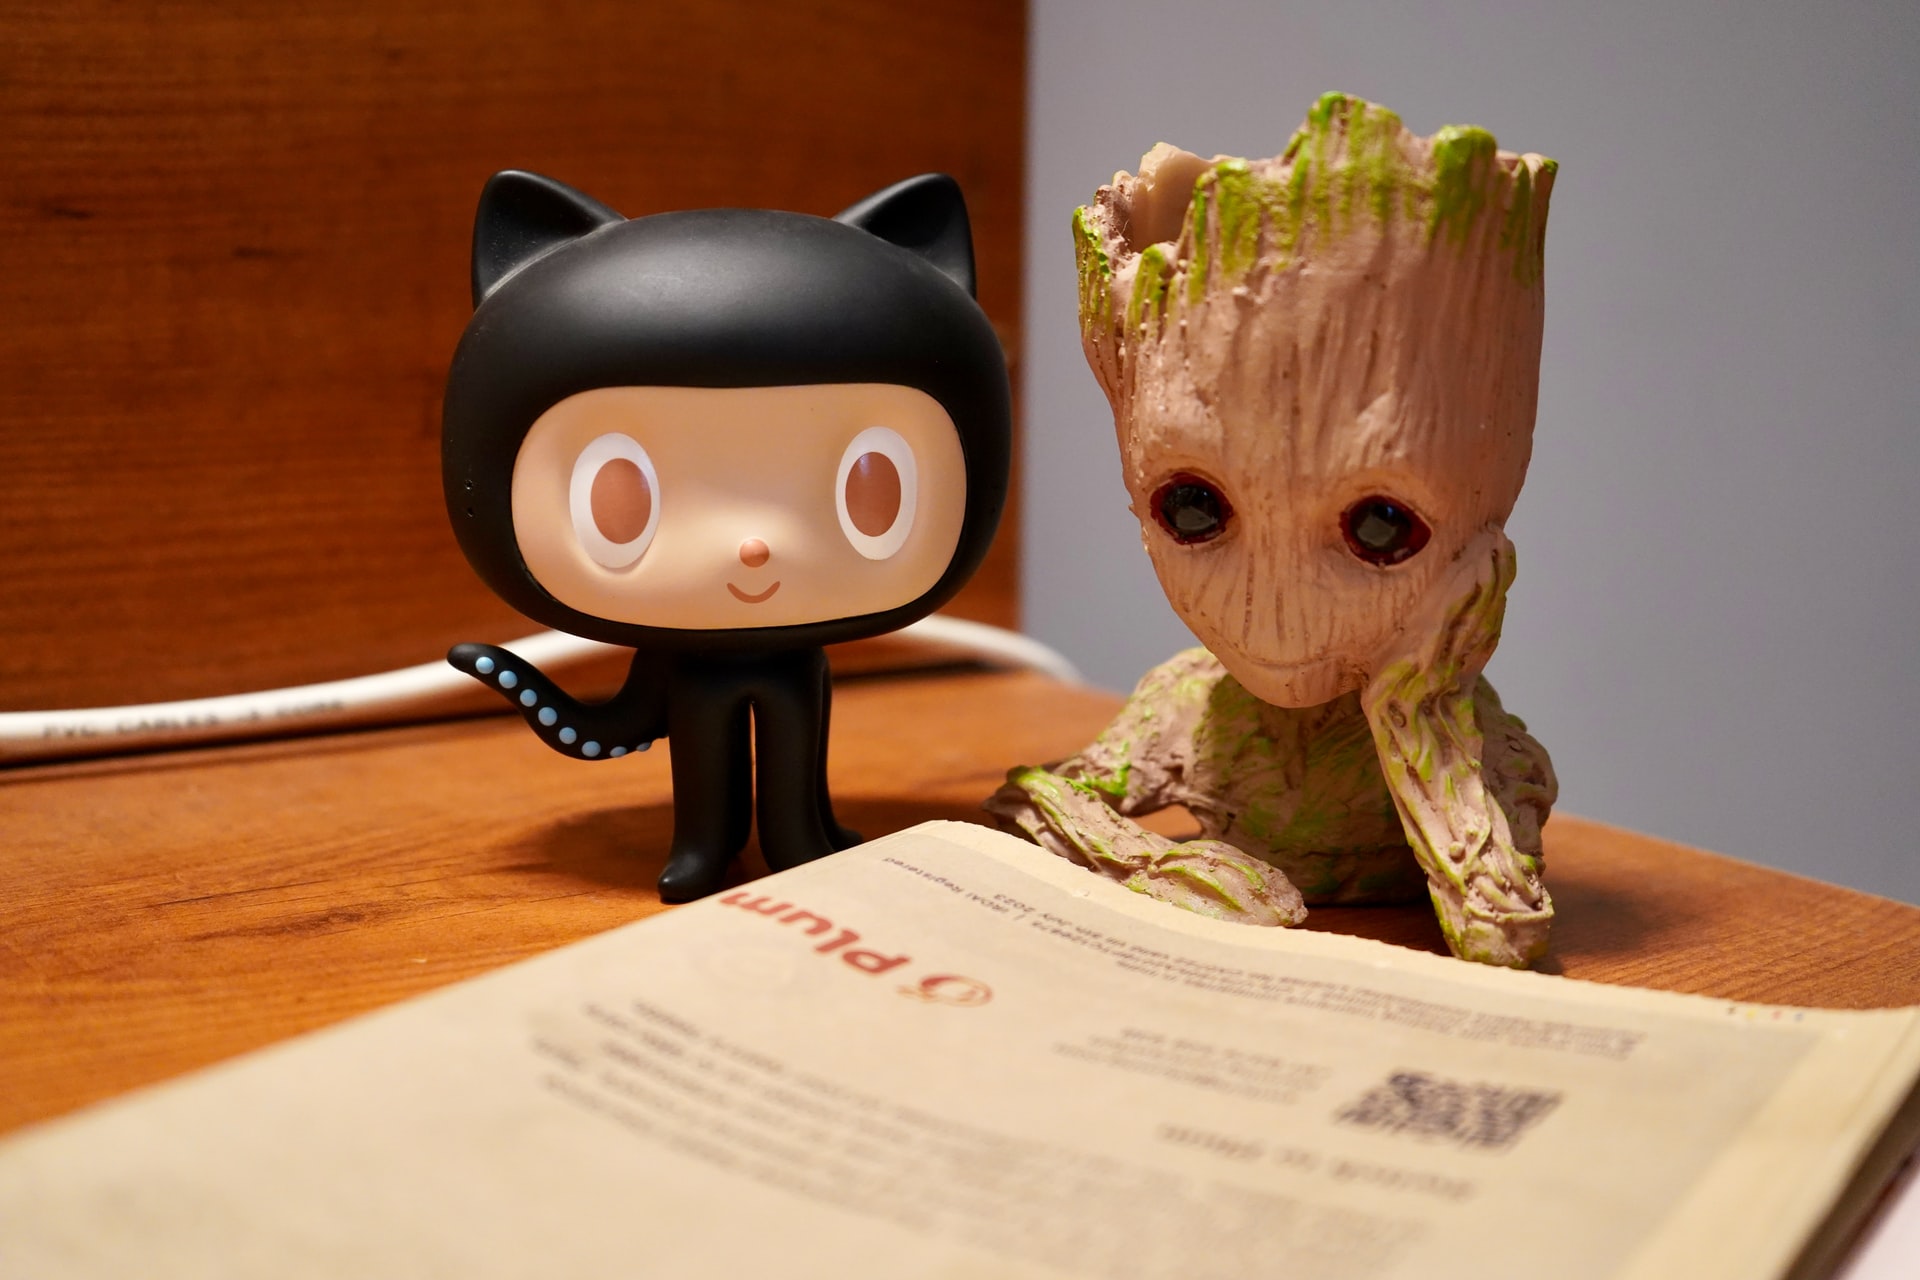 Groot and Octocat reading a newspaper